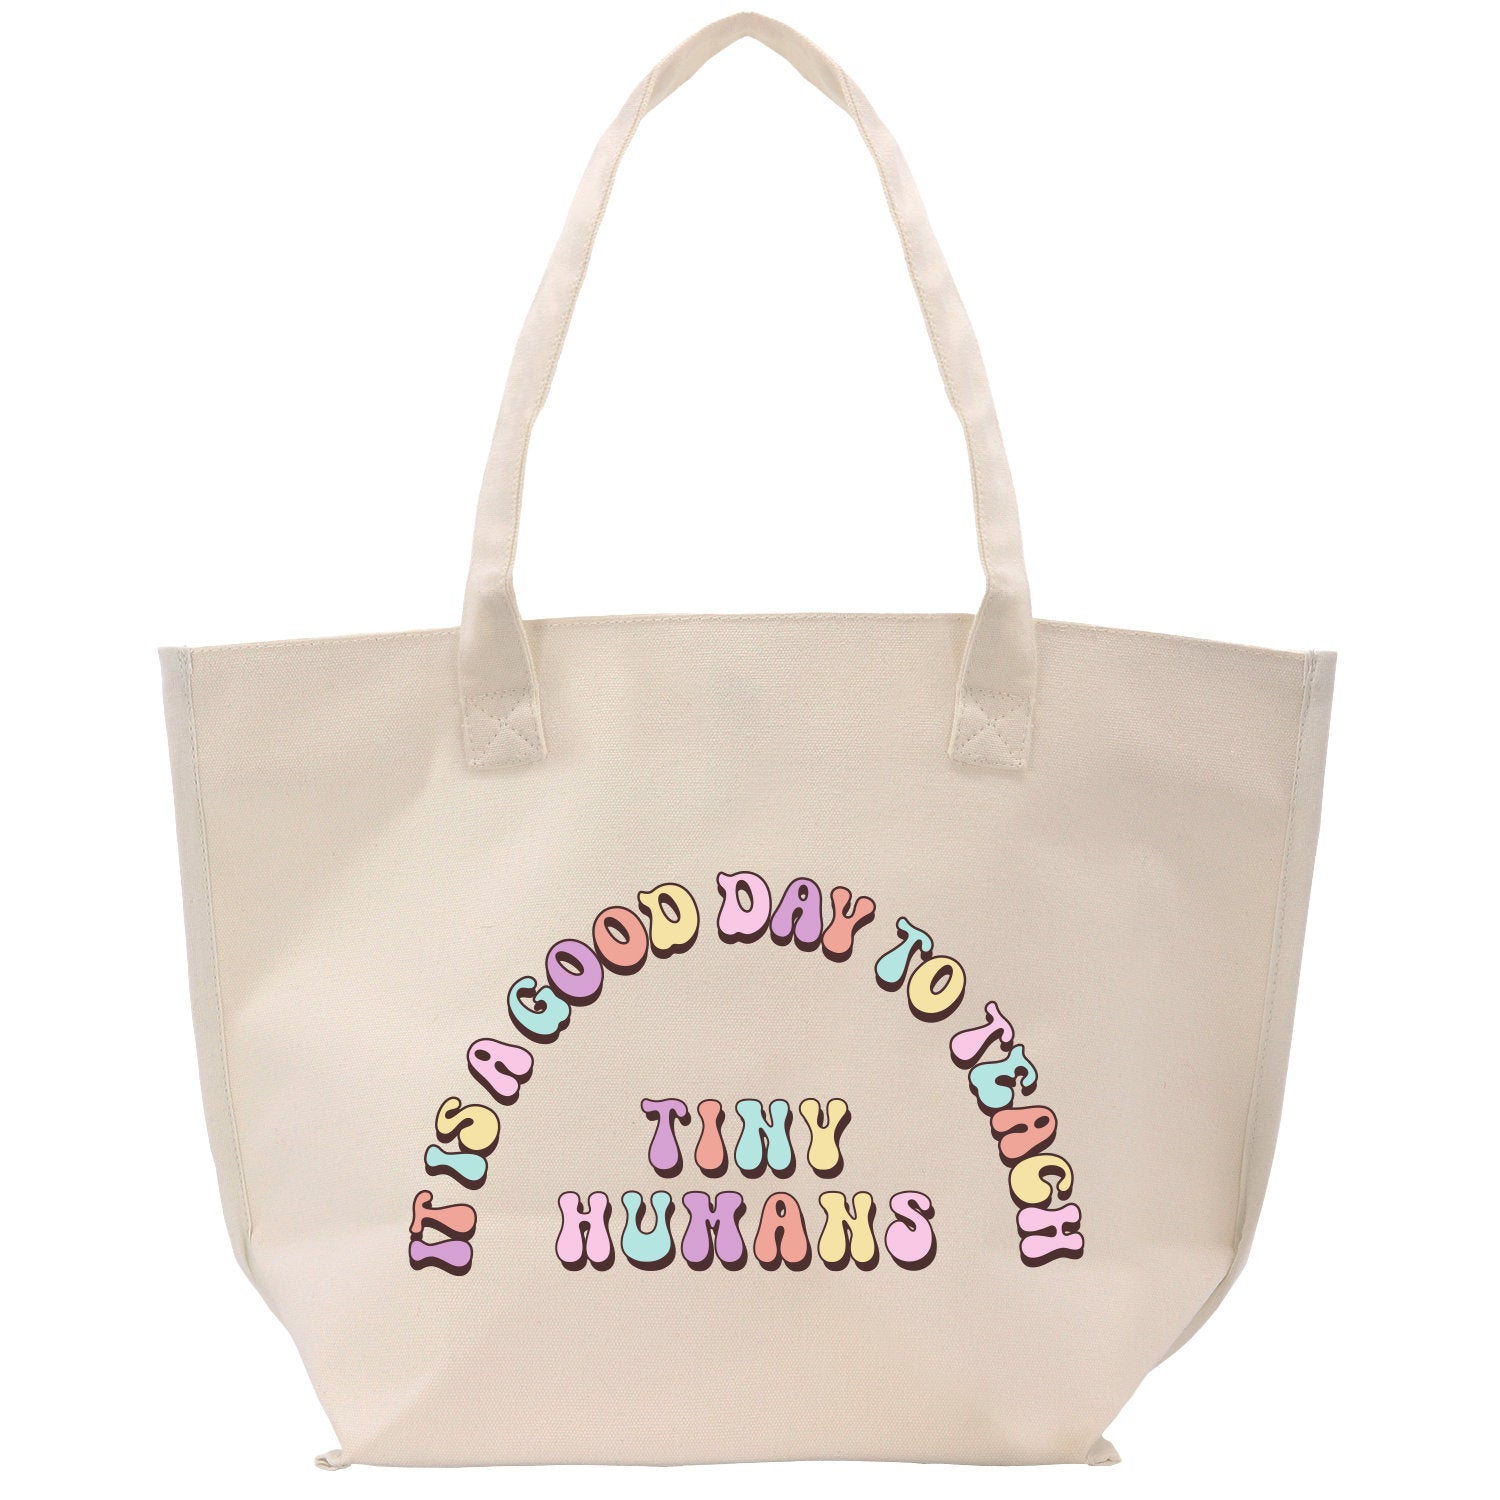 a white tote bag with the words good day tote on it